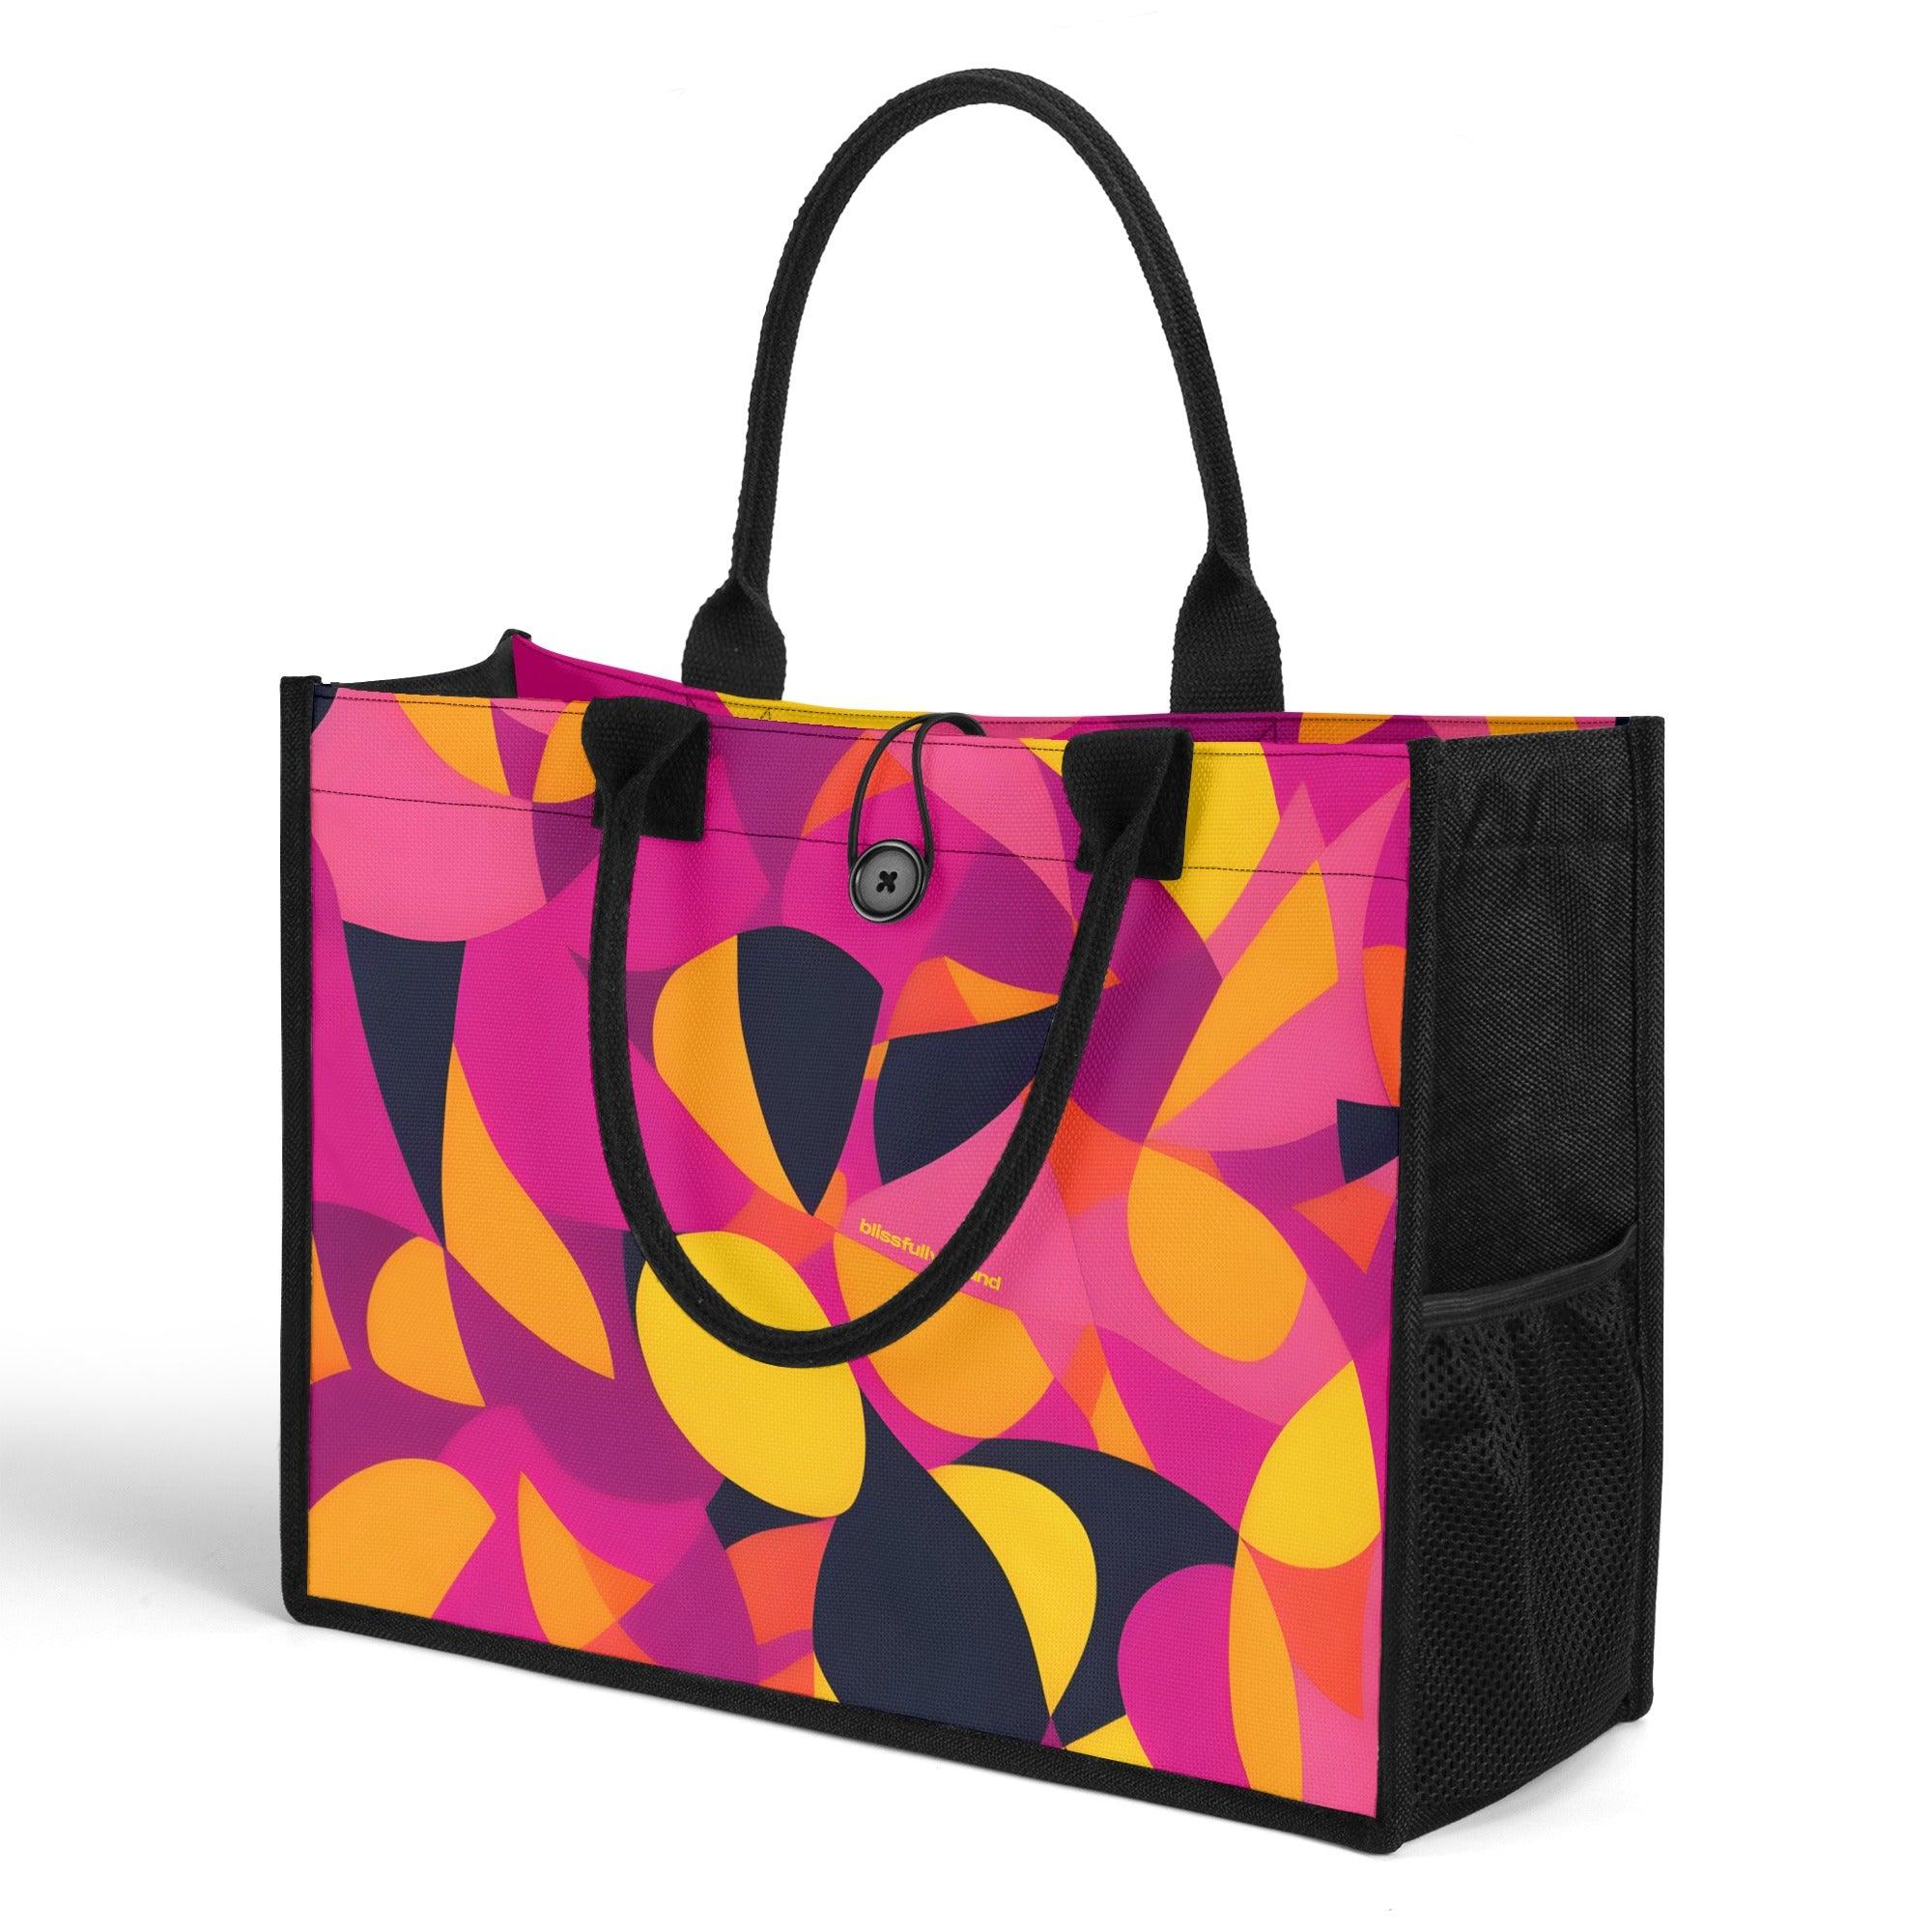 Airline Series Button Tie Canvas Tote Bag - Abstract Multicolor Print Medium Large Durable Handbag Mod Retro Bold Pink Orange Yellow Funky Blissfully Brand Flight 929 Munich